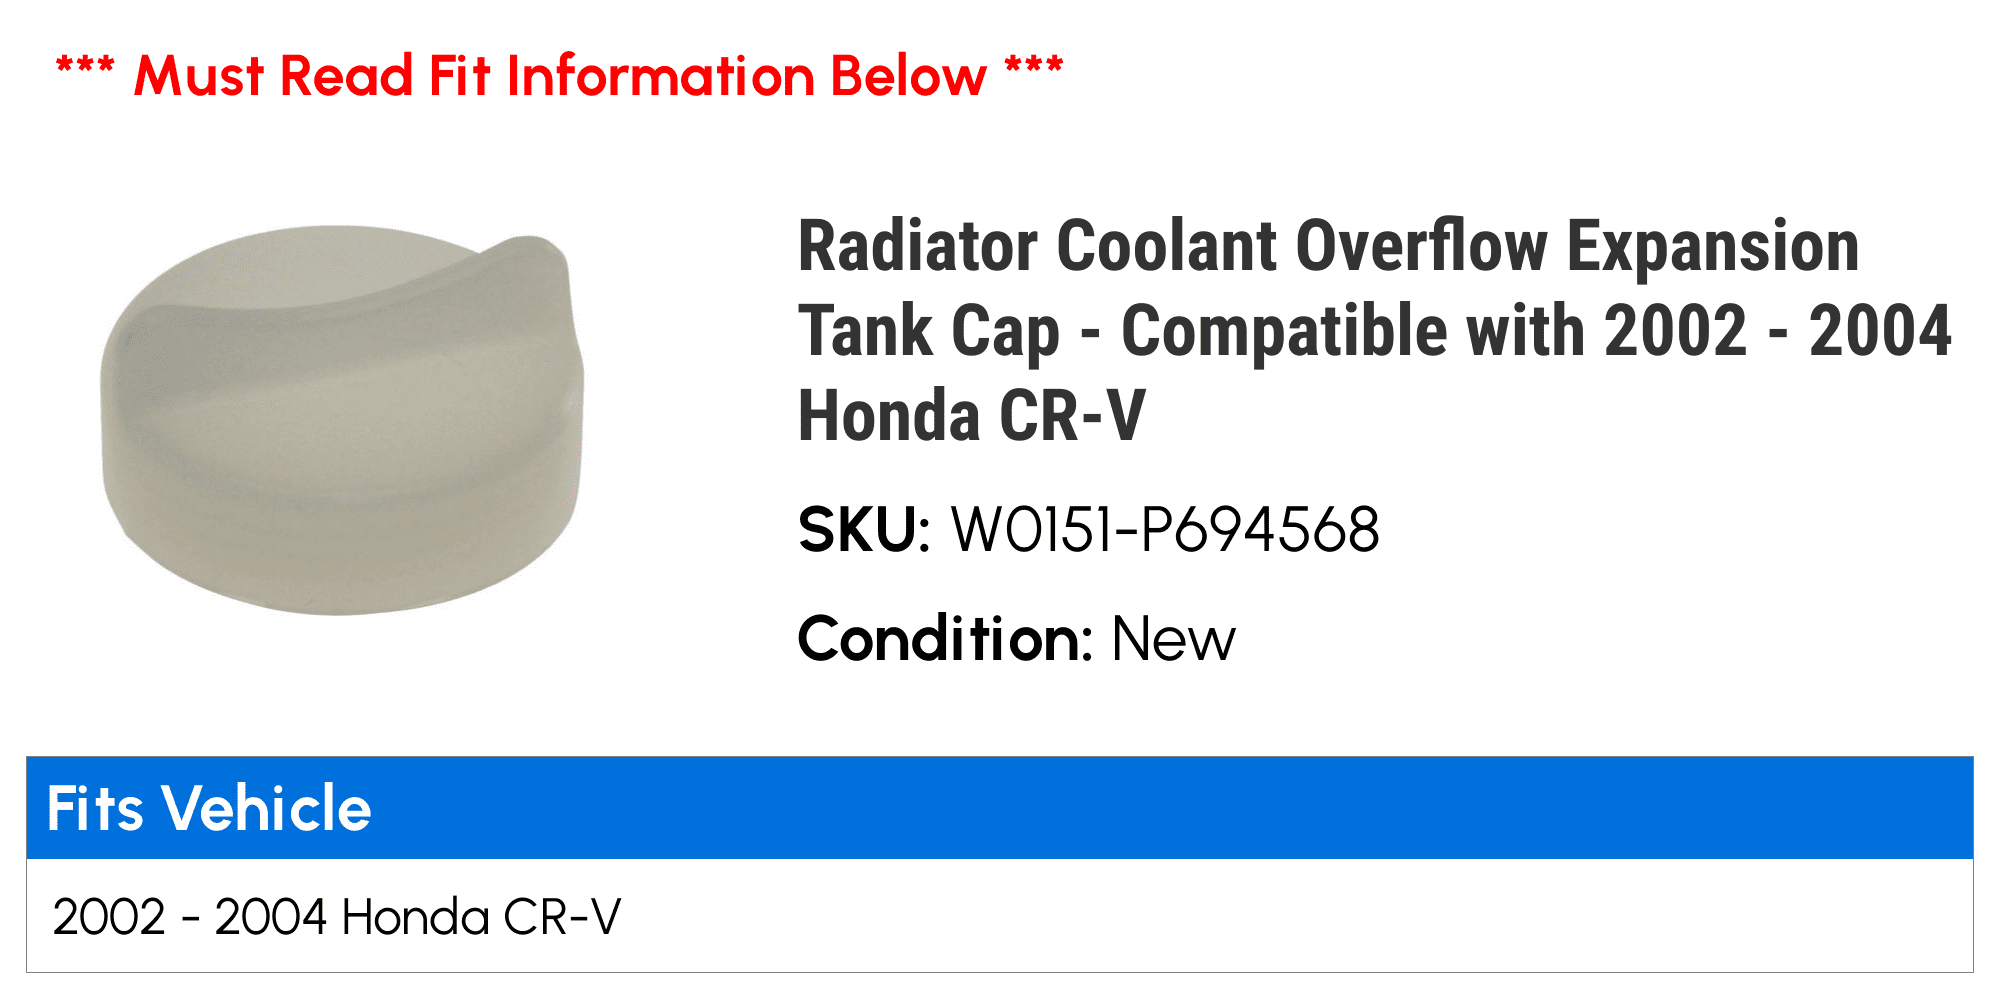 Radiator Coolant Overflow Expansion Tank Cap Compatible with 2002-2004 Honda CR-V 